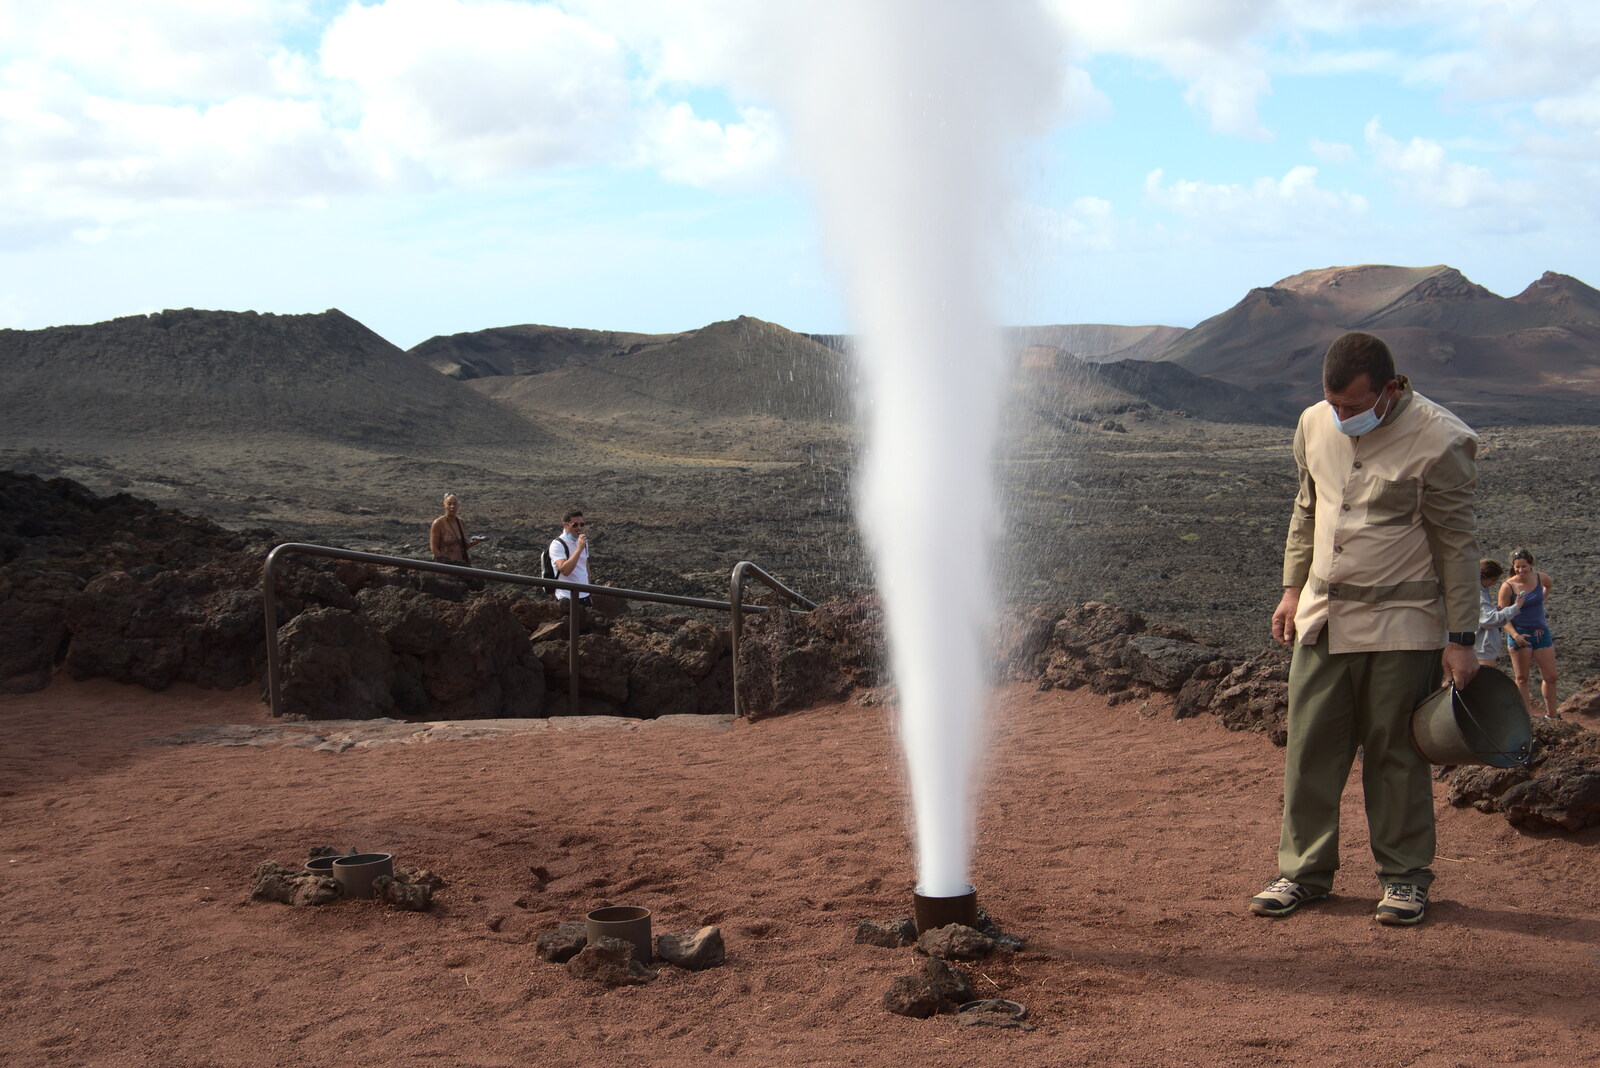 The artificial geyser goes off violently from The Volcanoes of Lanzarote, Canary Islands, Spain - 27th October 2021